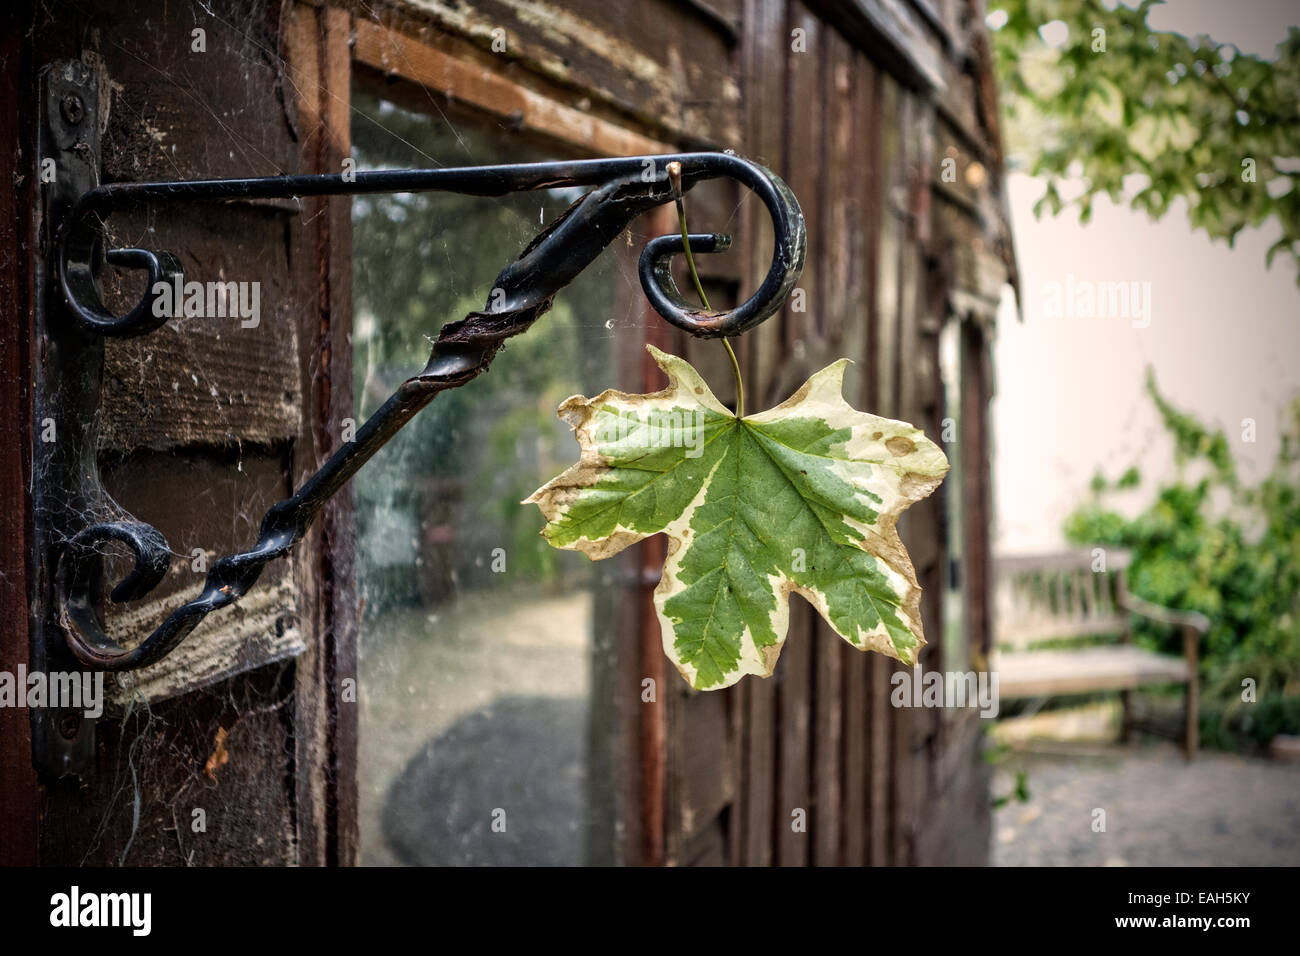 Flown there by the wind. A tree leaf in autumn / fall caught in a hanging basket bracket. Stock Photo